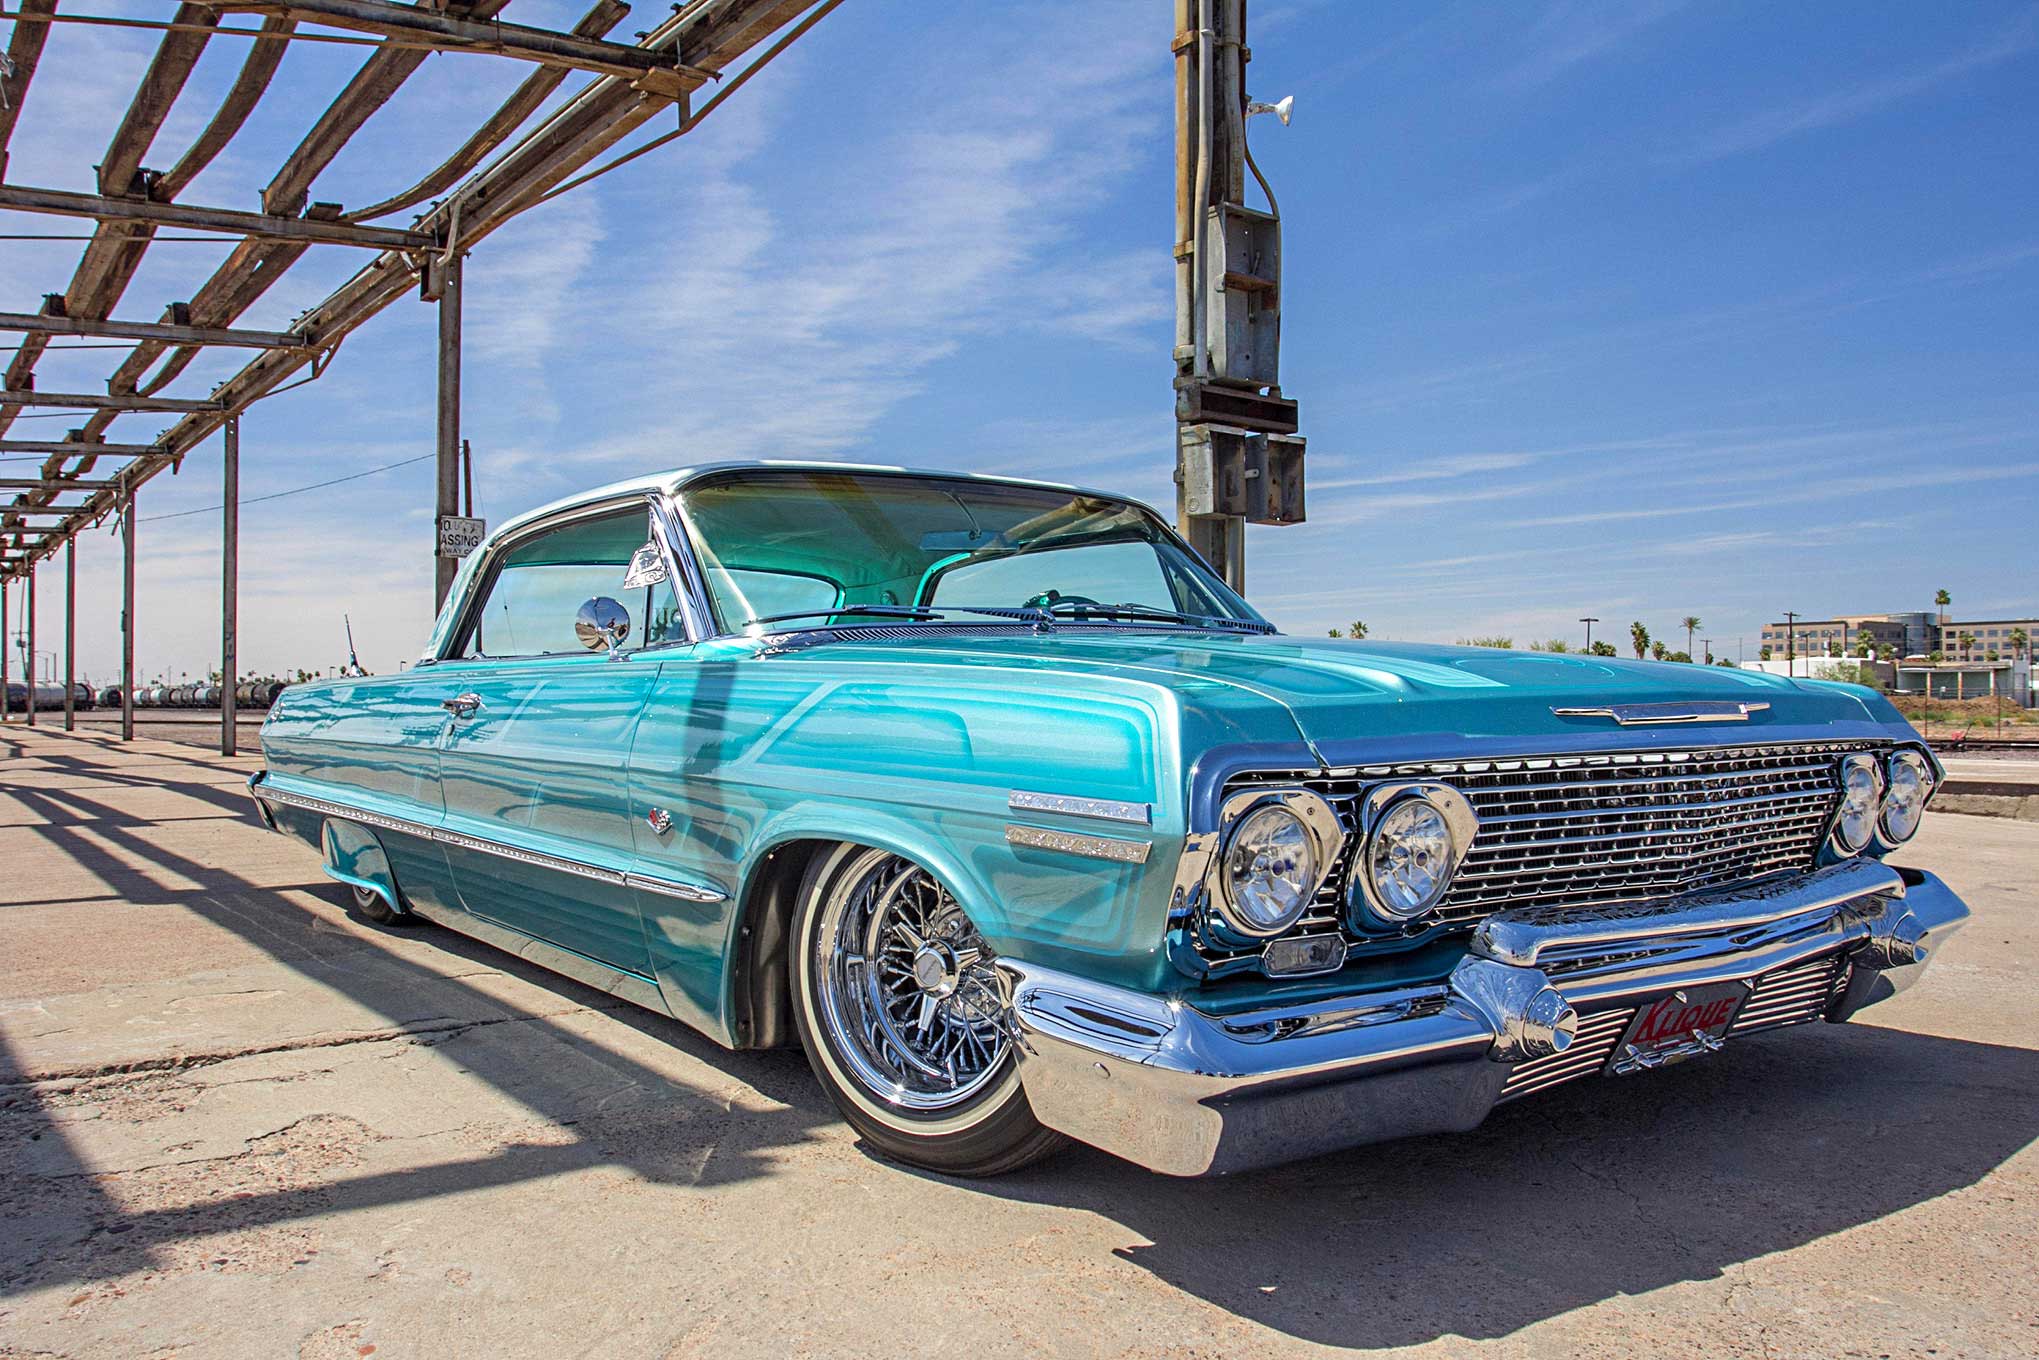 Lowrider HD Wallpapers and Backgrounds. 